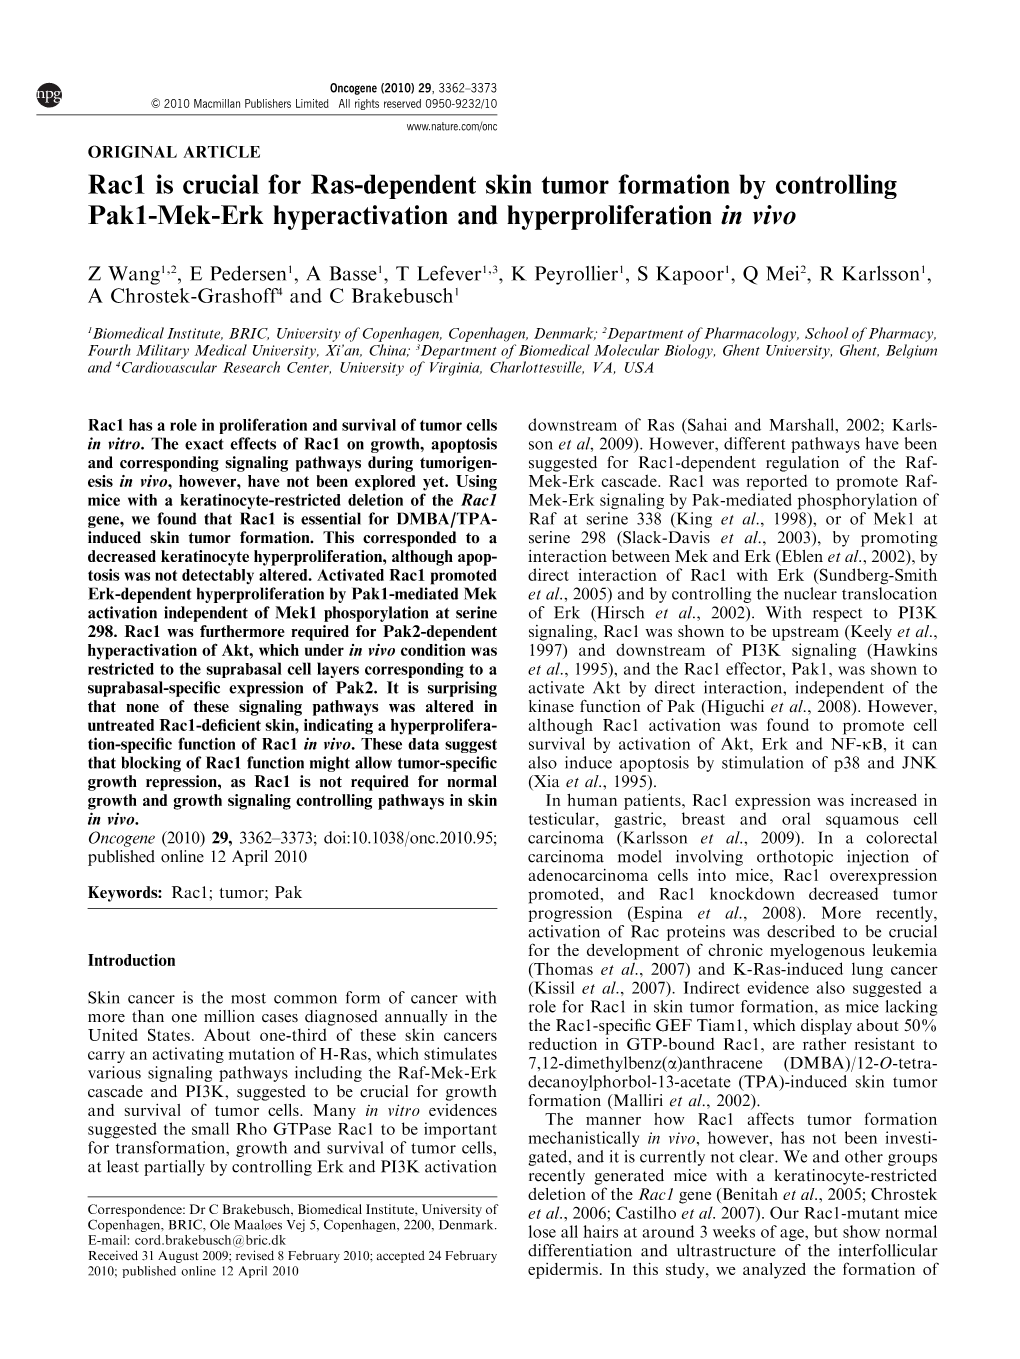 Rac1 Is Crucial for Ras-Dependent Skin Tumor Formation by Controlling Pak1-Mek-Erk Hyperactivation and Hyperproliferation in Vivo